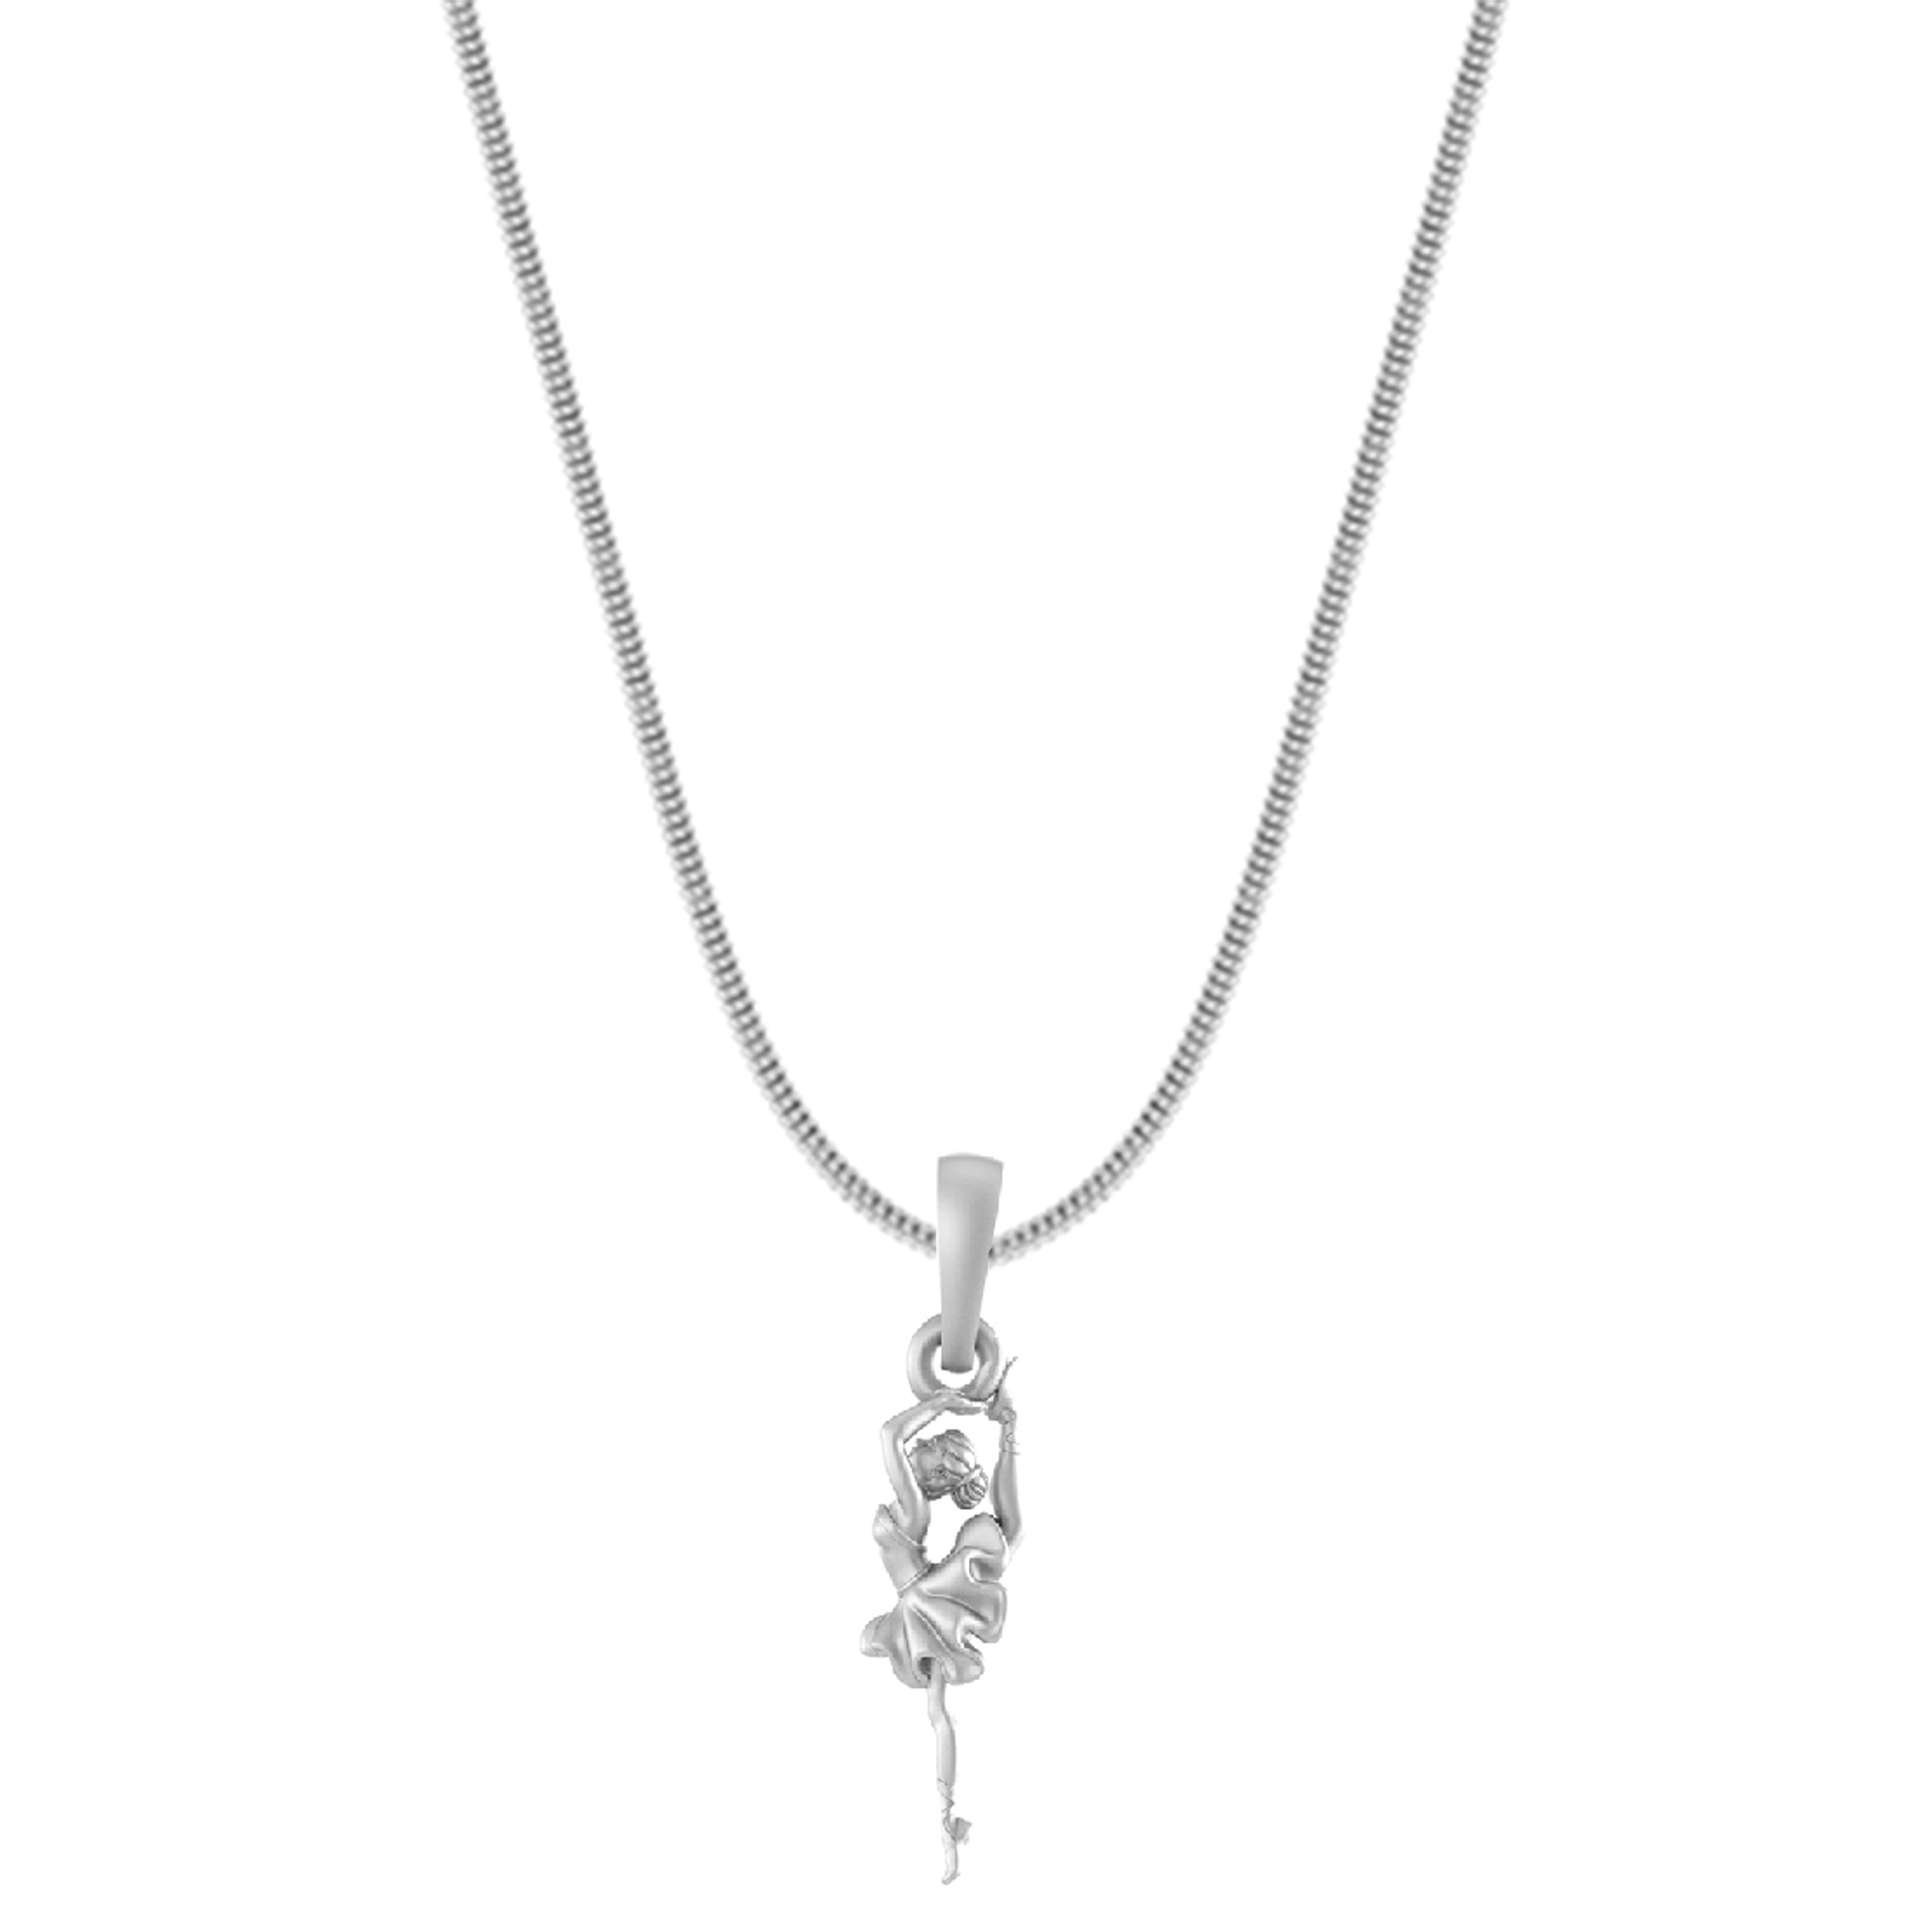 Akshat Sapphire Sterling Silver (92.5% purity) Stylish and Fashionable Happy Dancing girl Chain Pendant (Pendant with Snake Chain) for Men & Women Pure Silver gorgeous dancing girl Chain Locket for Happiness and joy